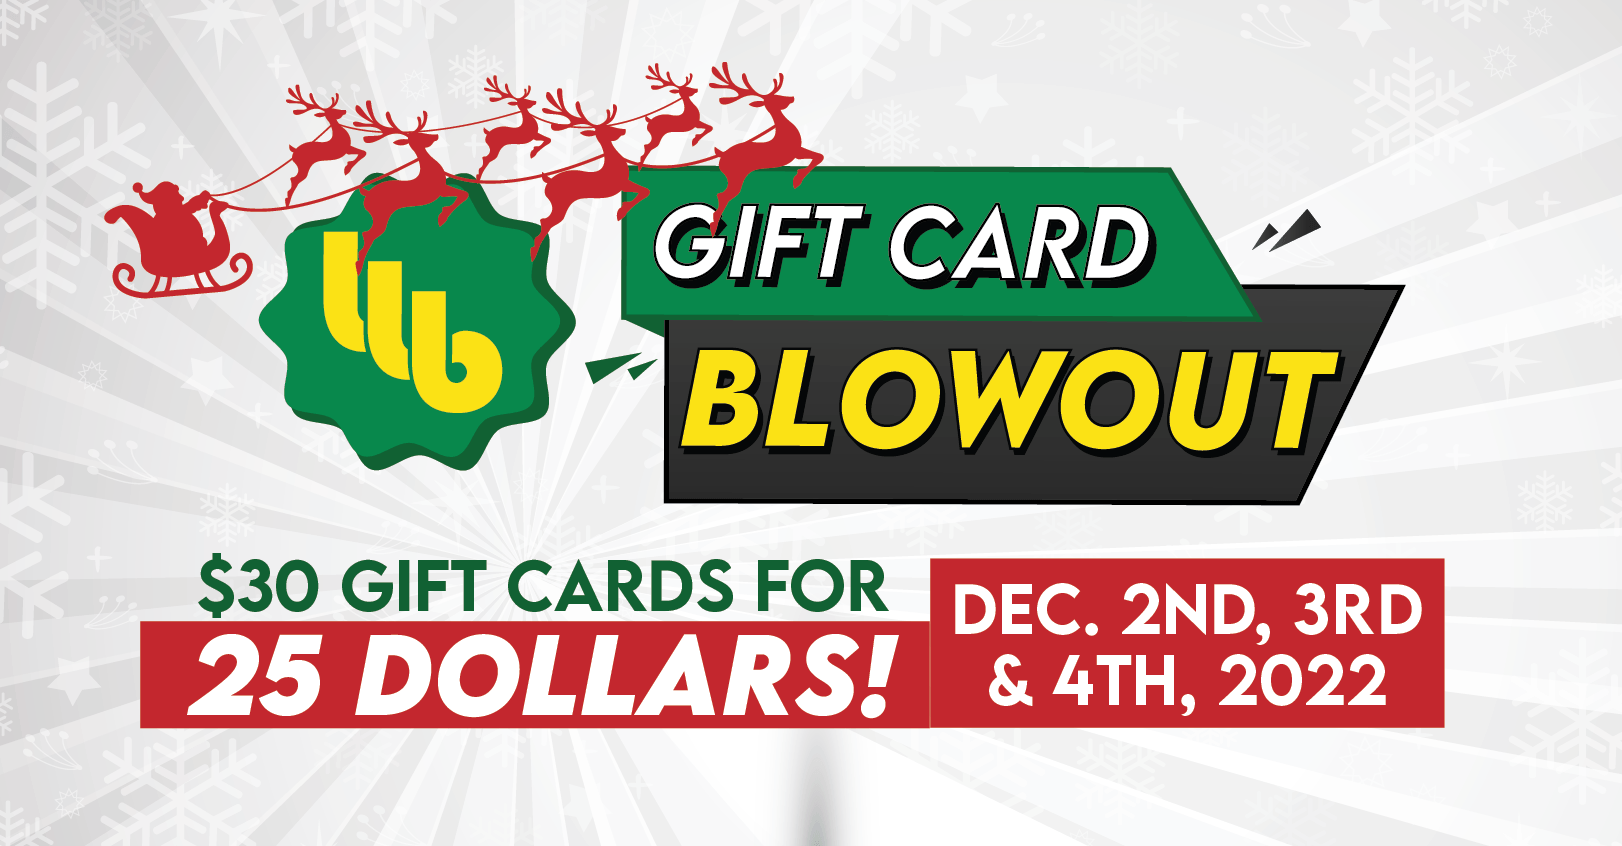 Bomgaars Gift Card Blowout